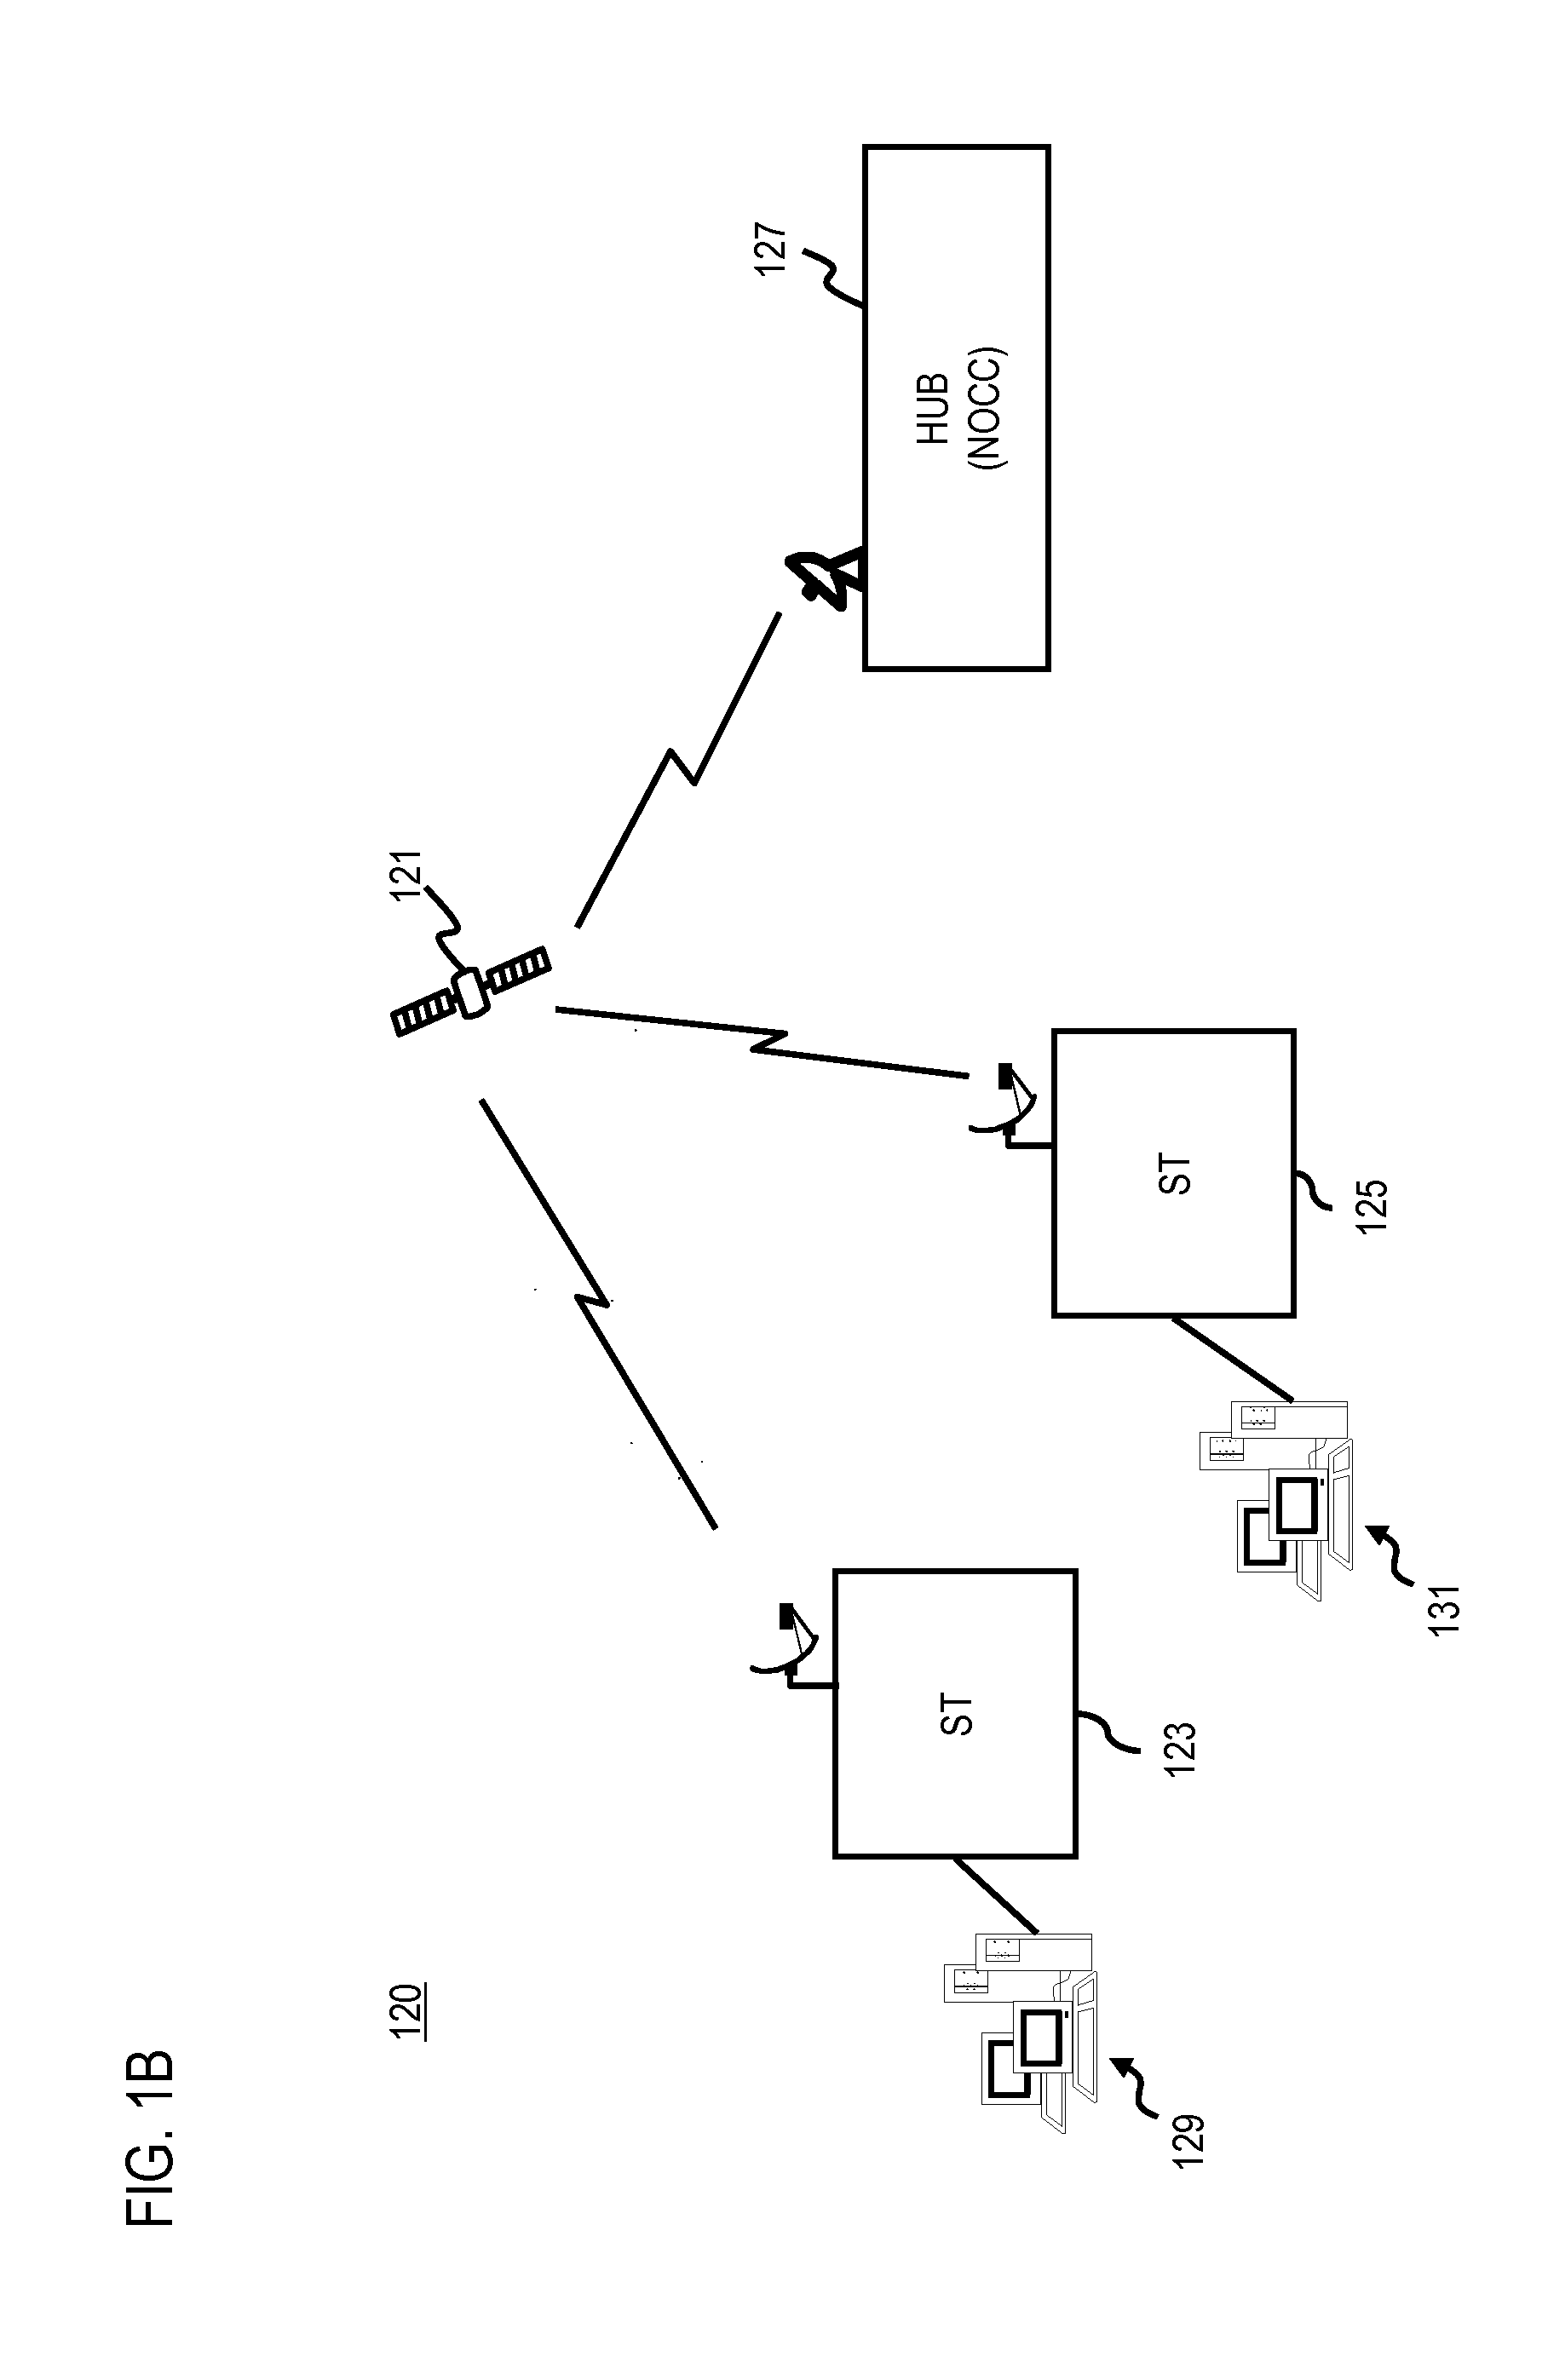 Method and system for providing low density parity check (LDPC) coding for scrambled coded multiple access (SCMA)